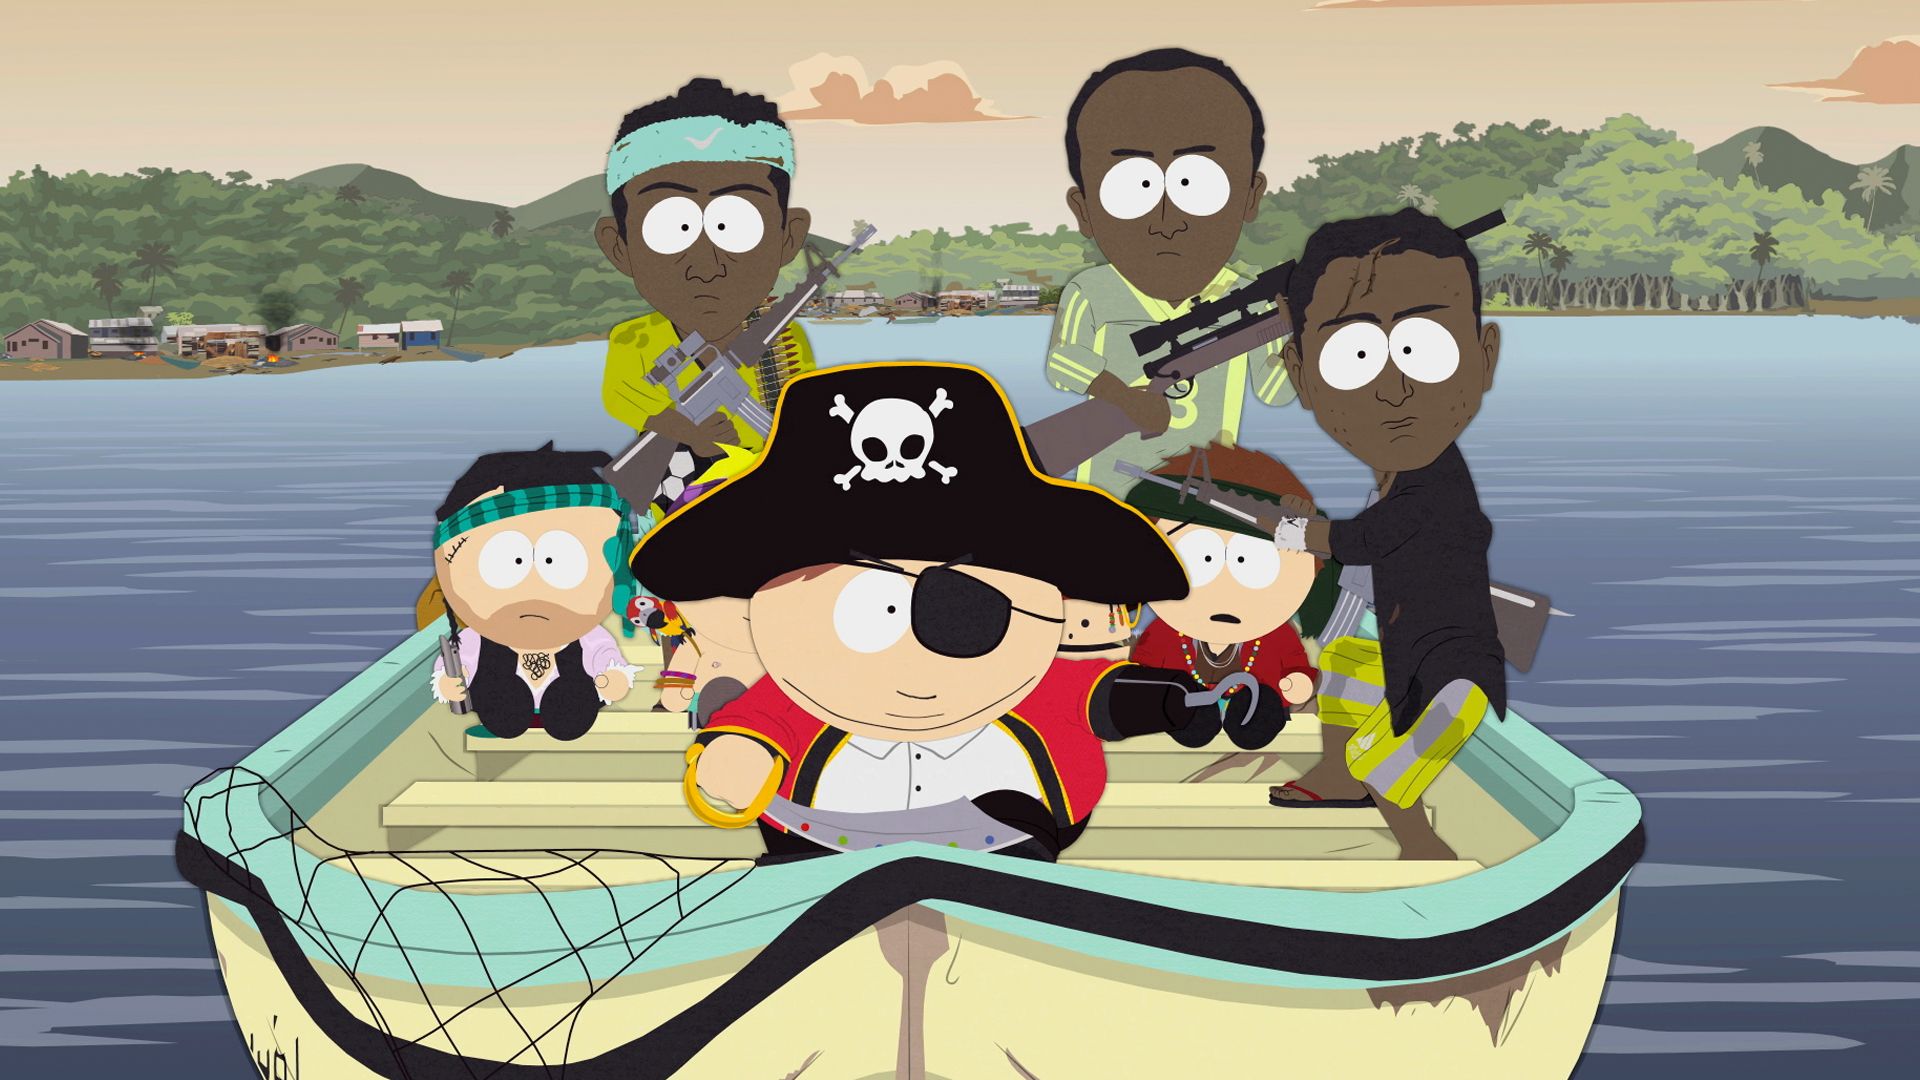 THIS Is Your Pirate Boat? - Season 13 Episode 7 - South Park